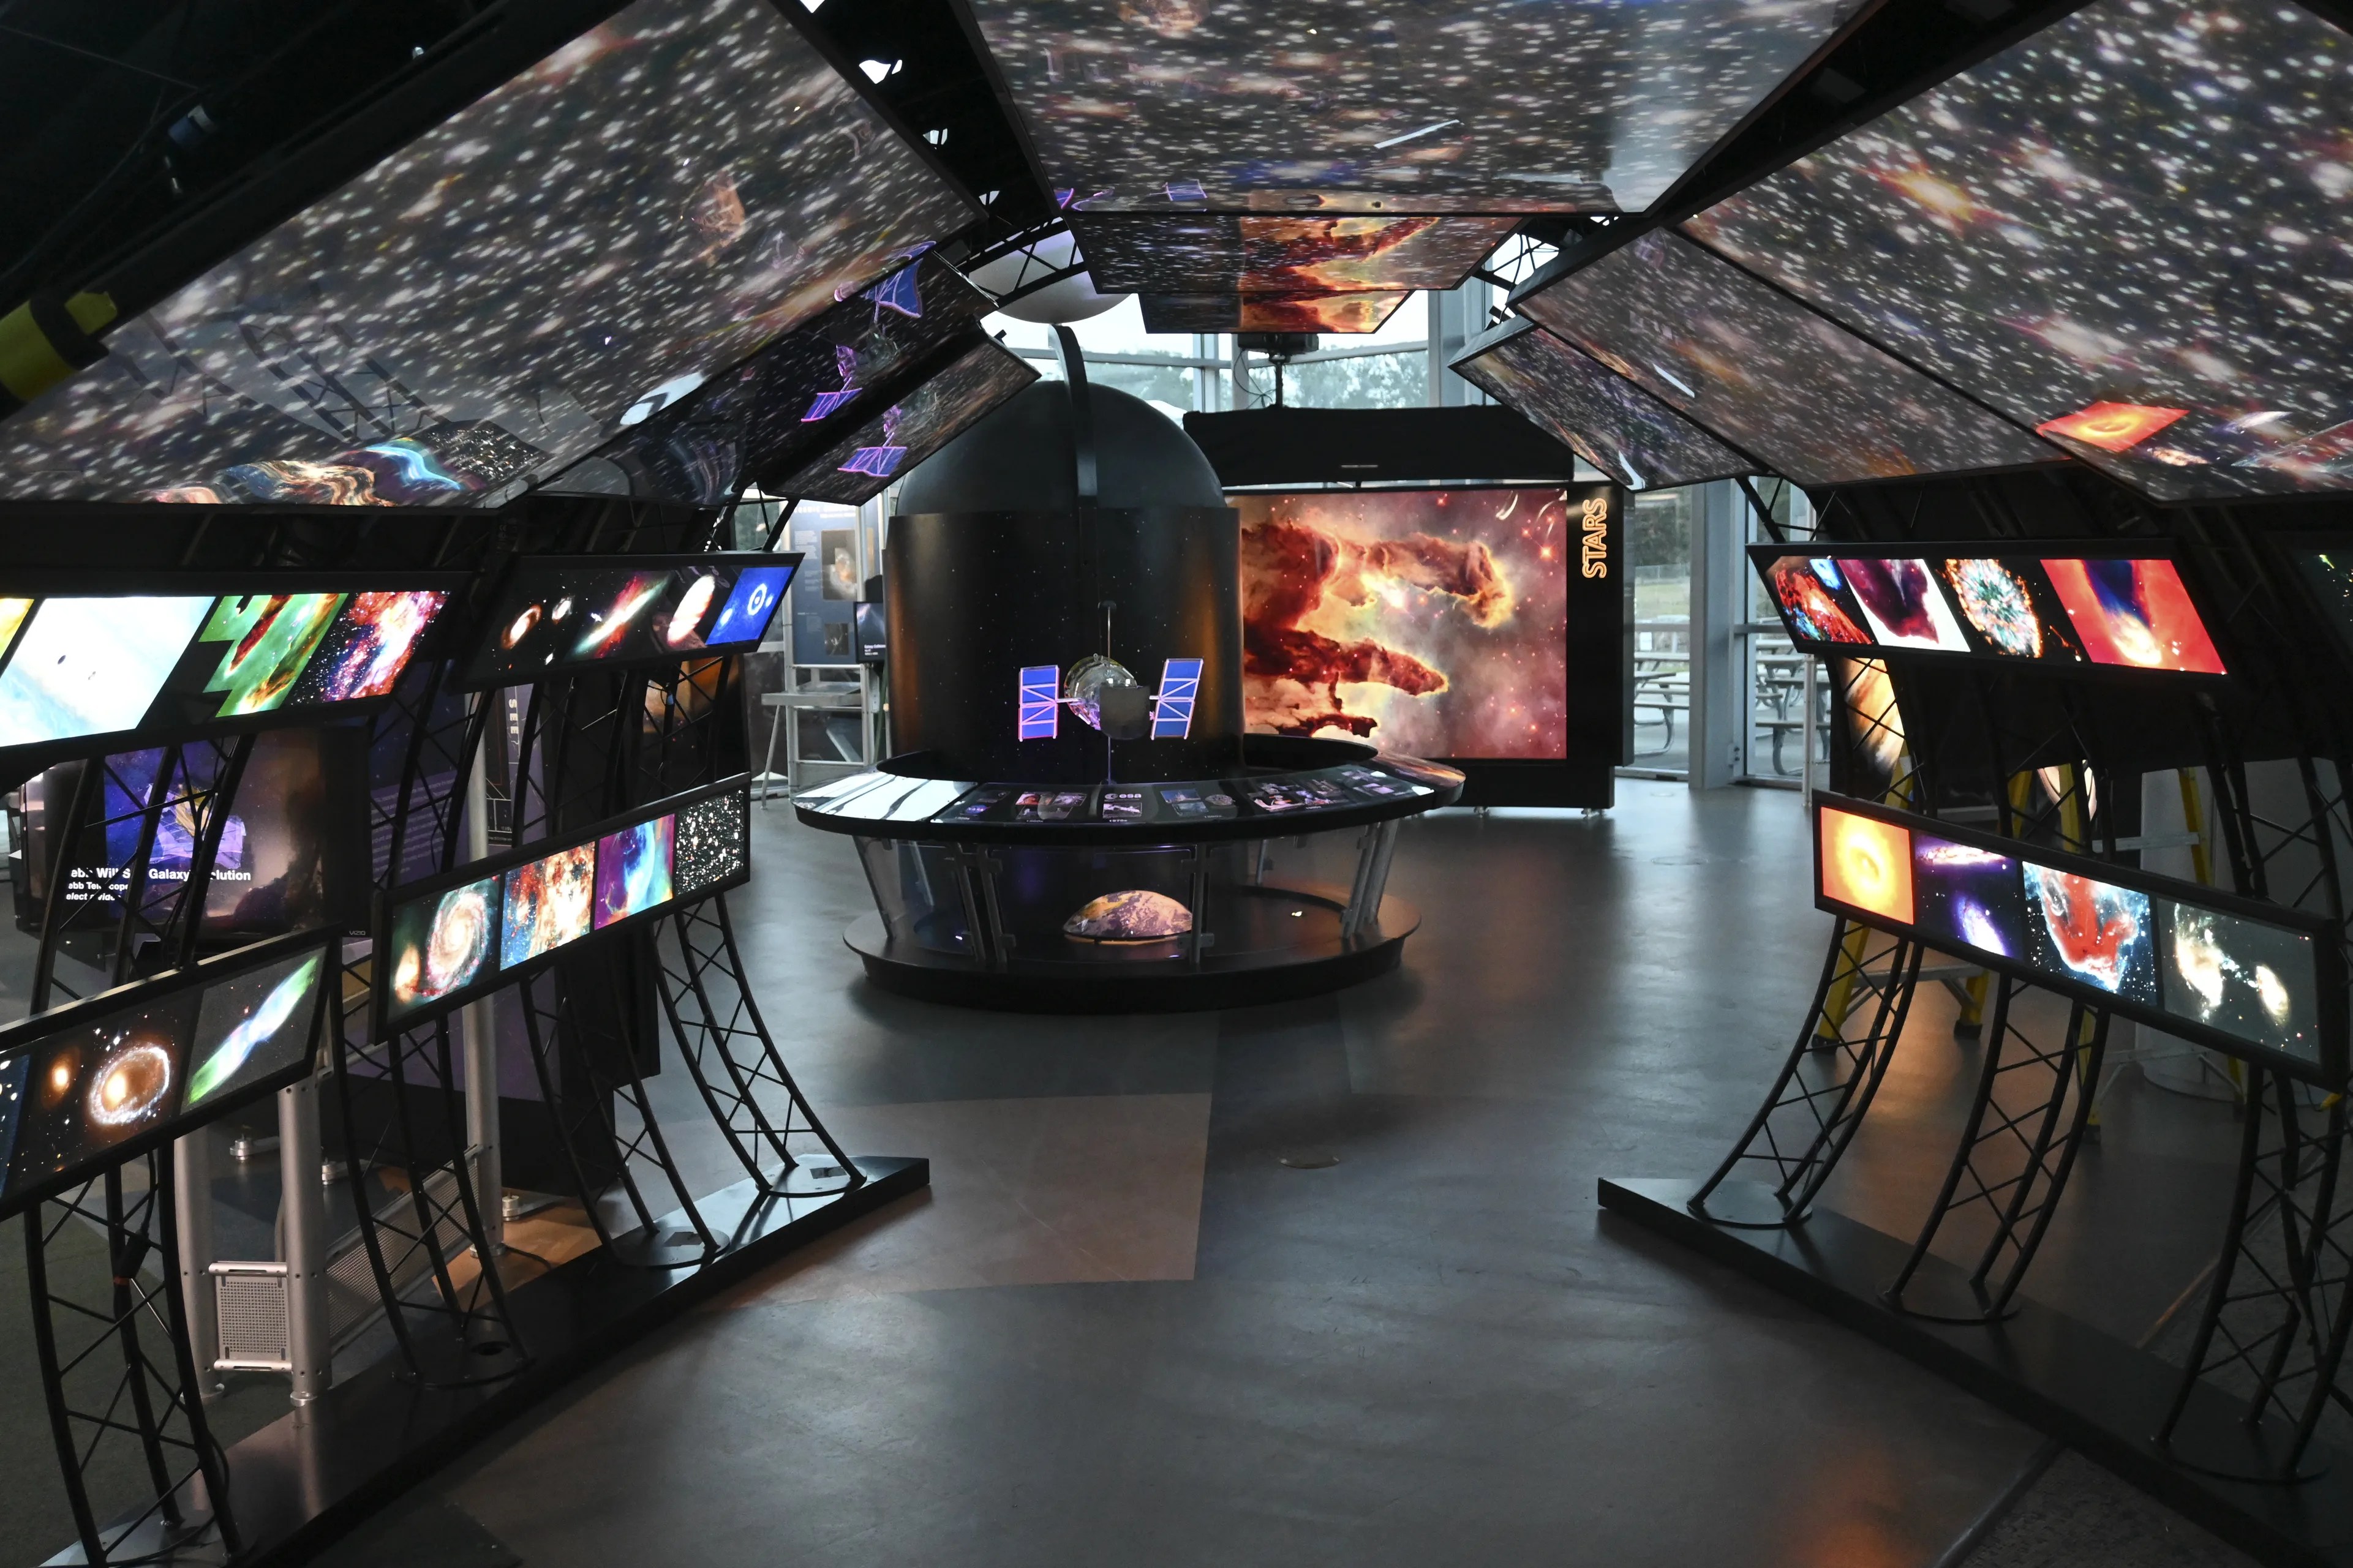 View of from within the entry tunnel of the Hubble exhibit. Illuminated Hubble images of galaxies and stars overhead, individual objects along the walls. Hubble Space Telescope model at the end of of the tunnel. Large illuminated Eagle Nebula image beyond.